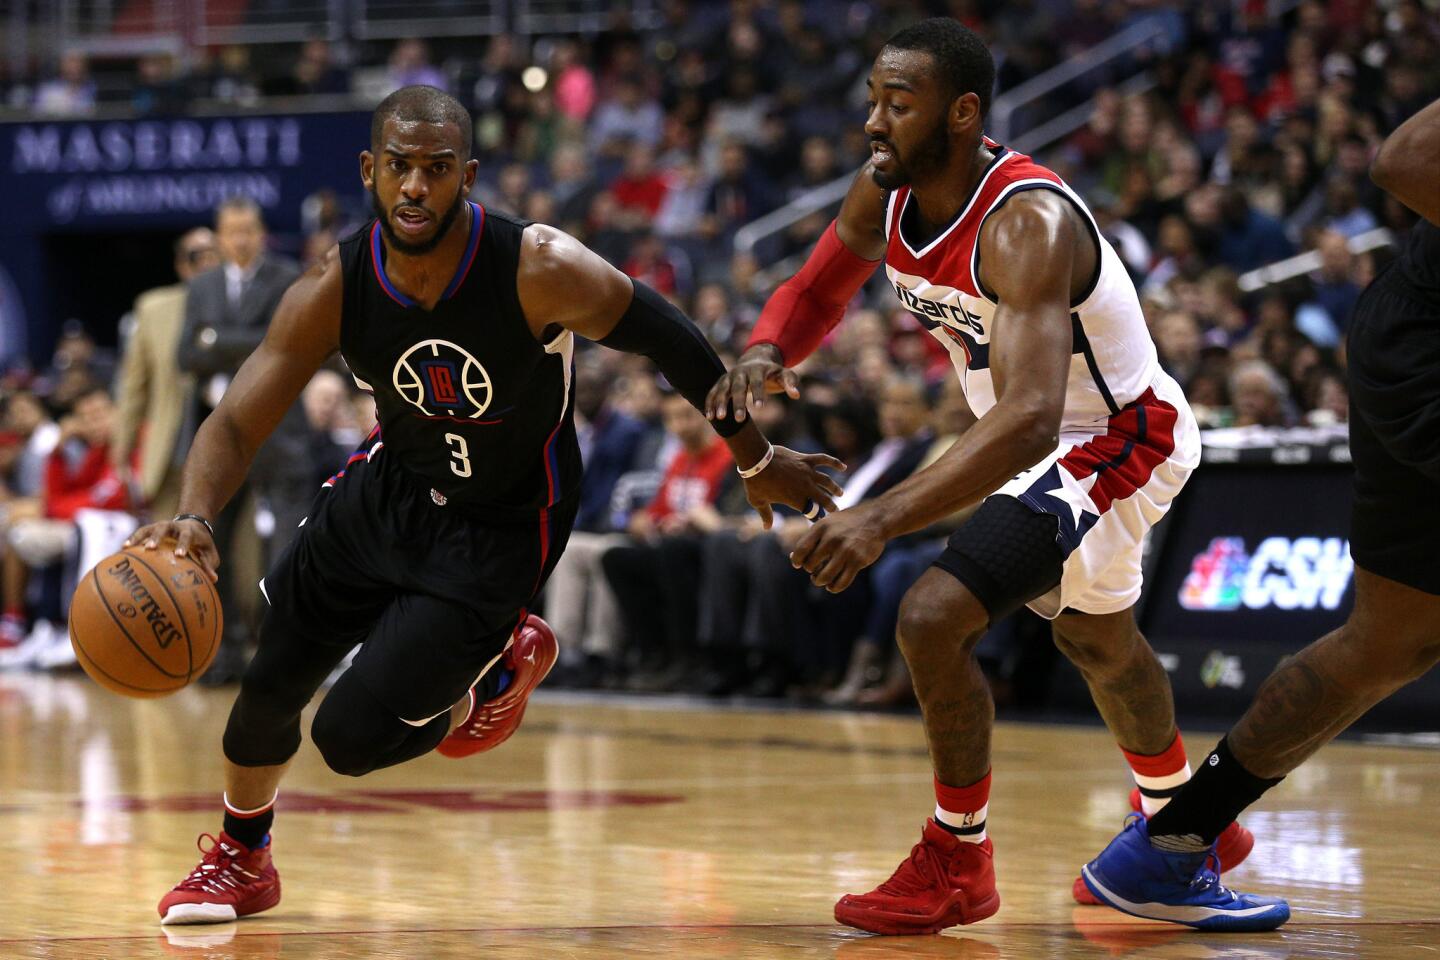 Clippers point guard Chris Paul dribbles past Wizards guard John Wall during the first half.